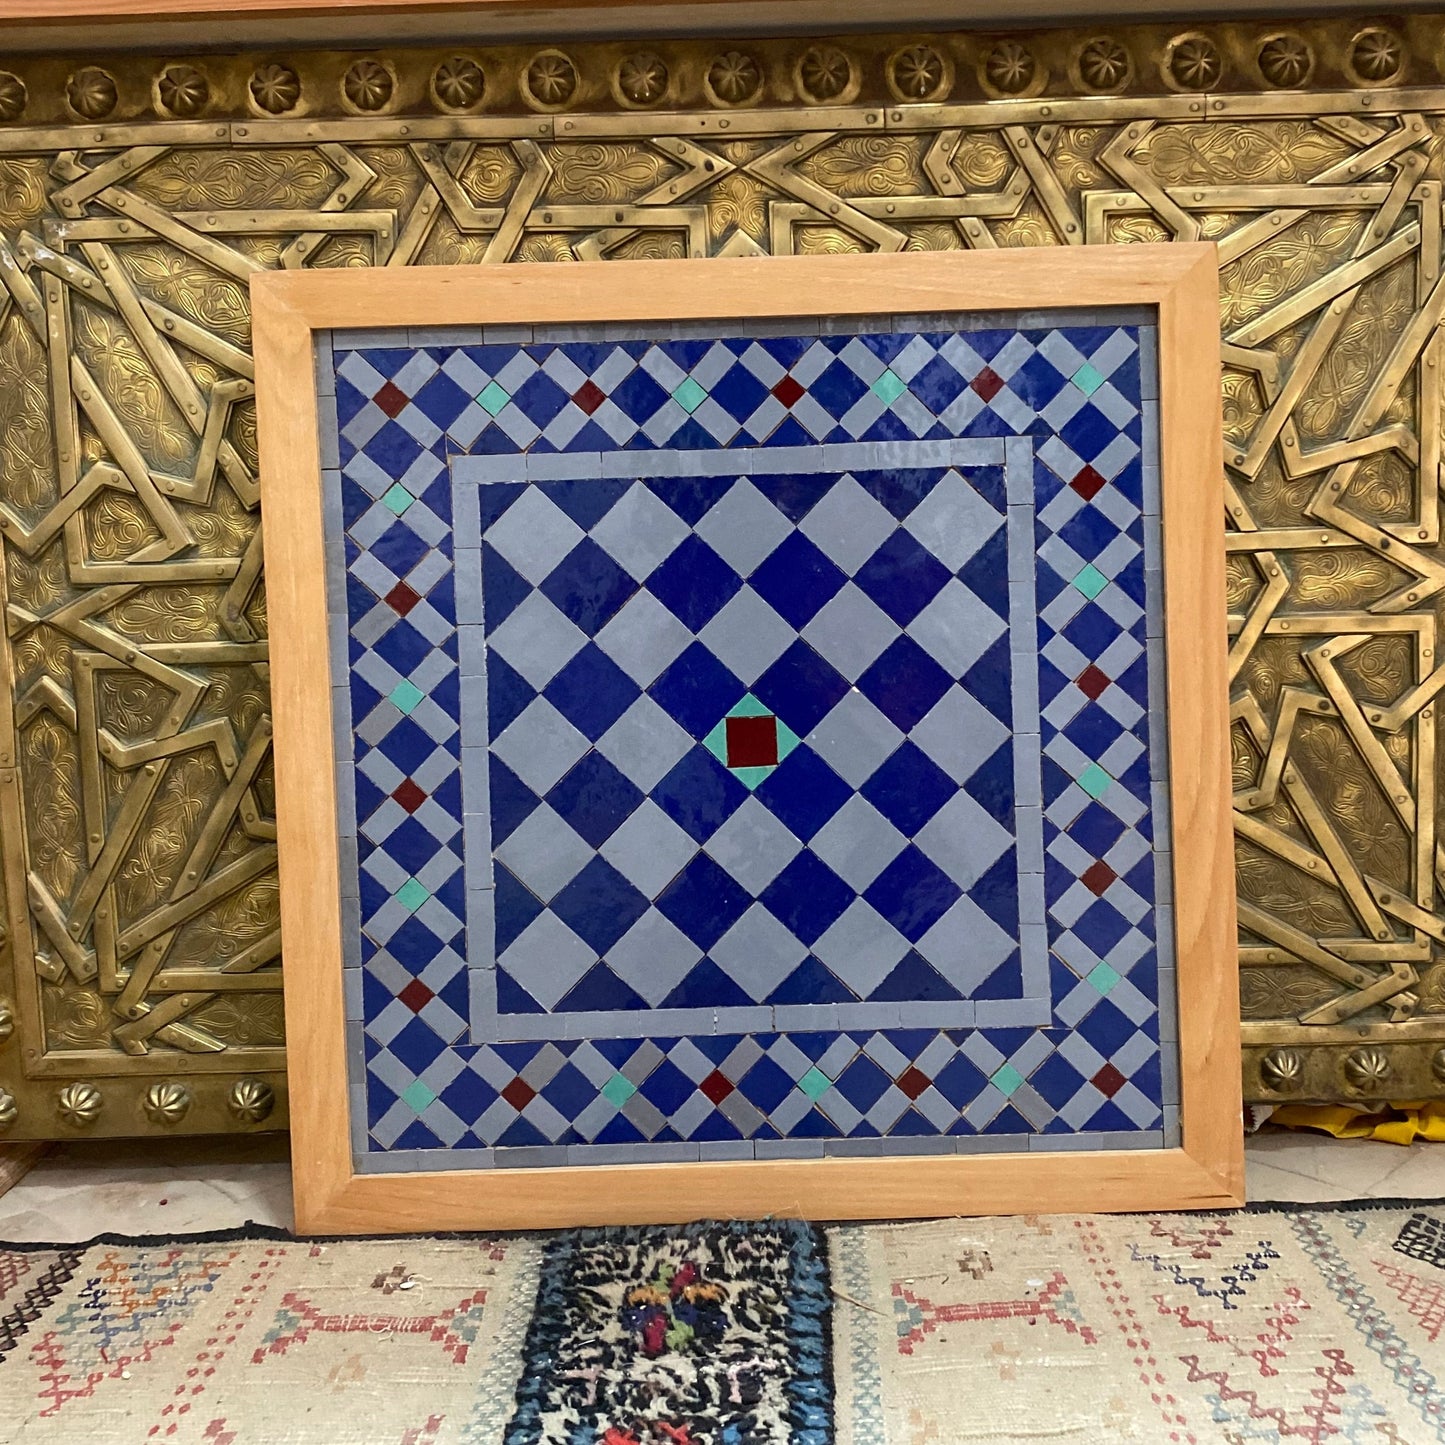 Moroccan mosaic in Alhambra palace mosaic wall hanging with wooden frame , wall decor mosaic art, tiles clay wall art . Alhambra